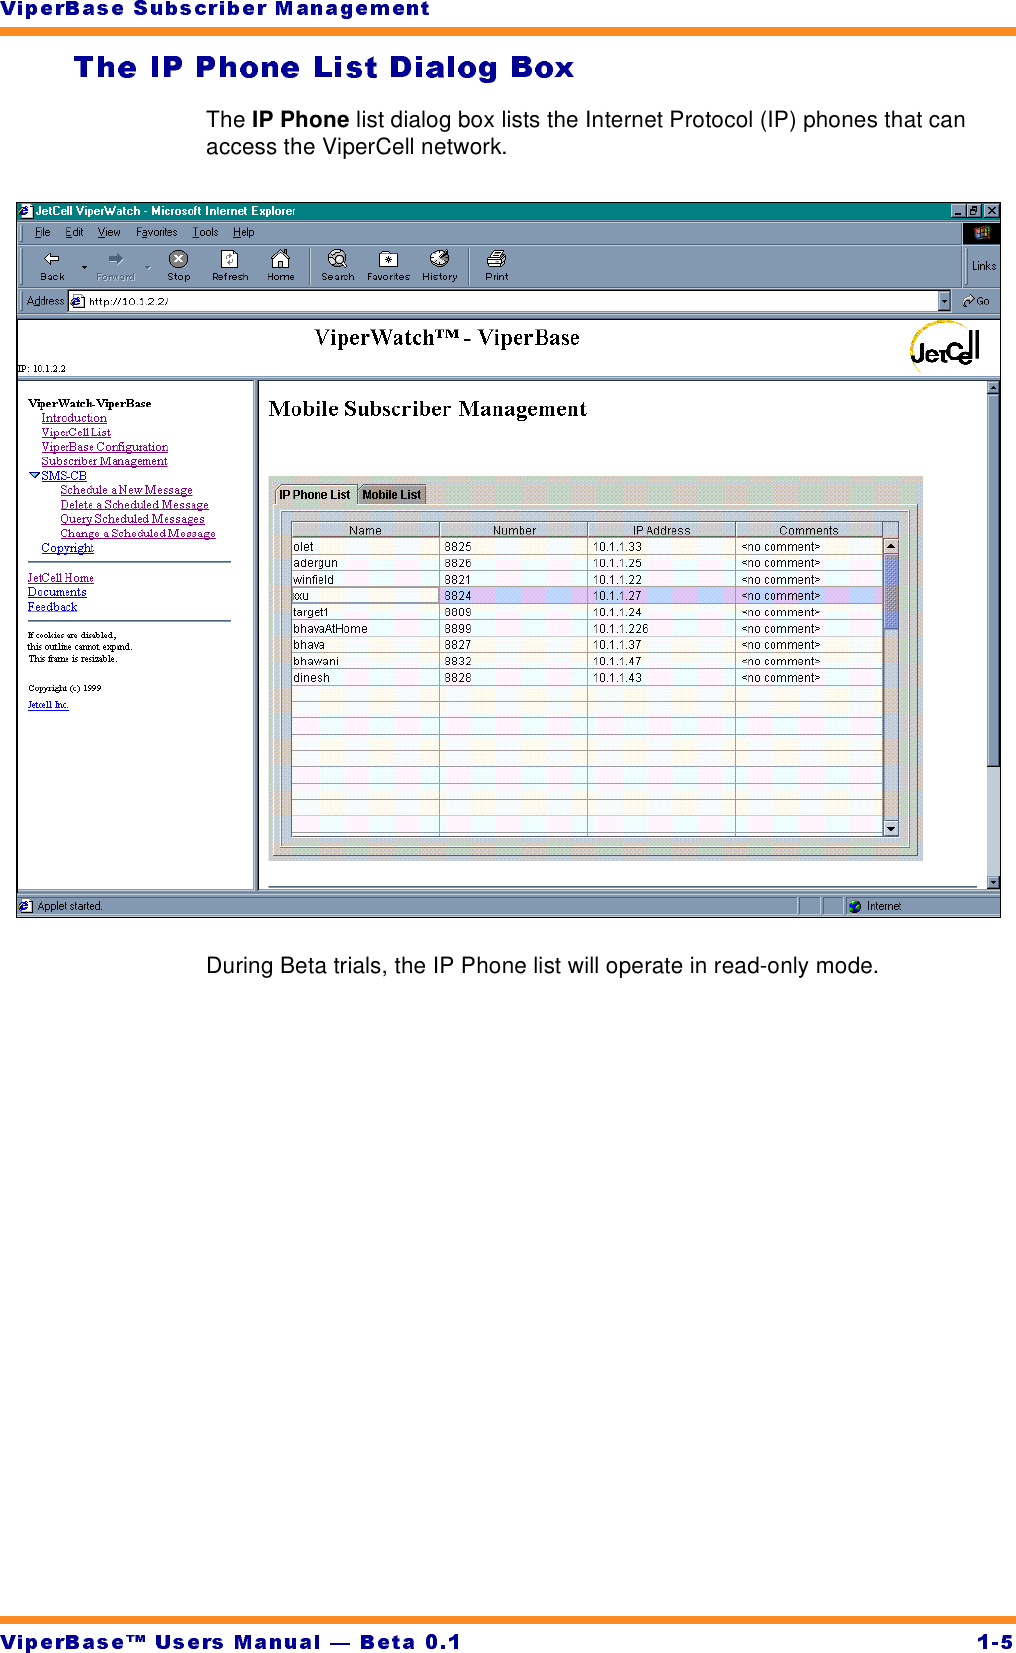 The IP Phone list dialog box lists the Internet Protocol (IP) phones that can access the ViperCell network.During Beta trials, the IP Phone list will operate in read-only mode.